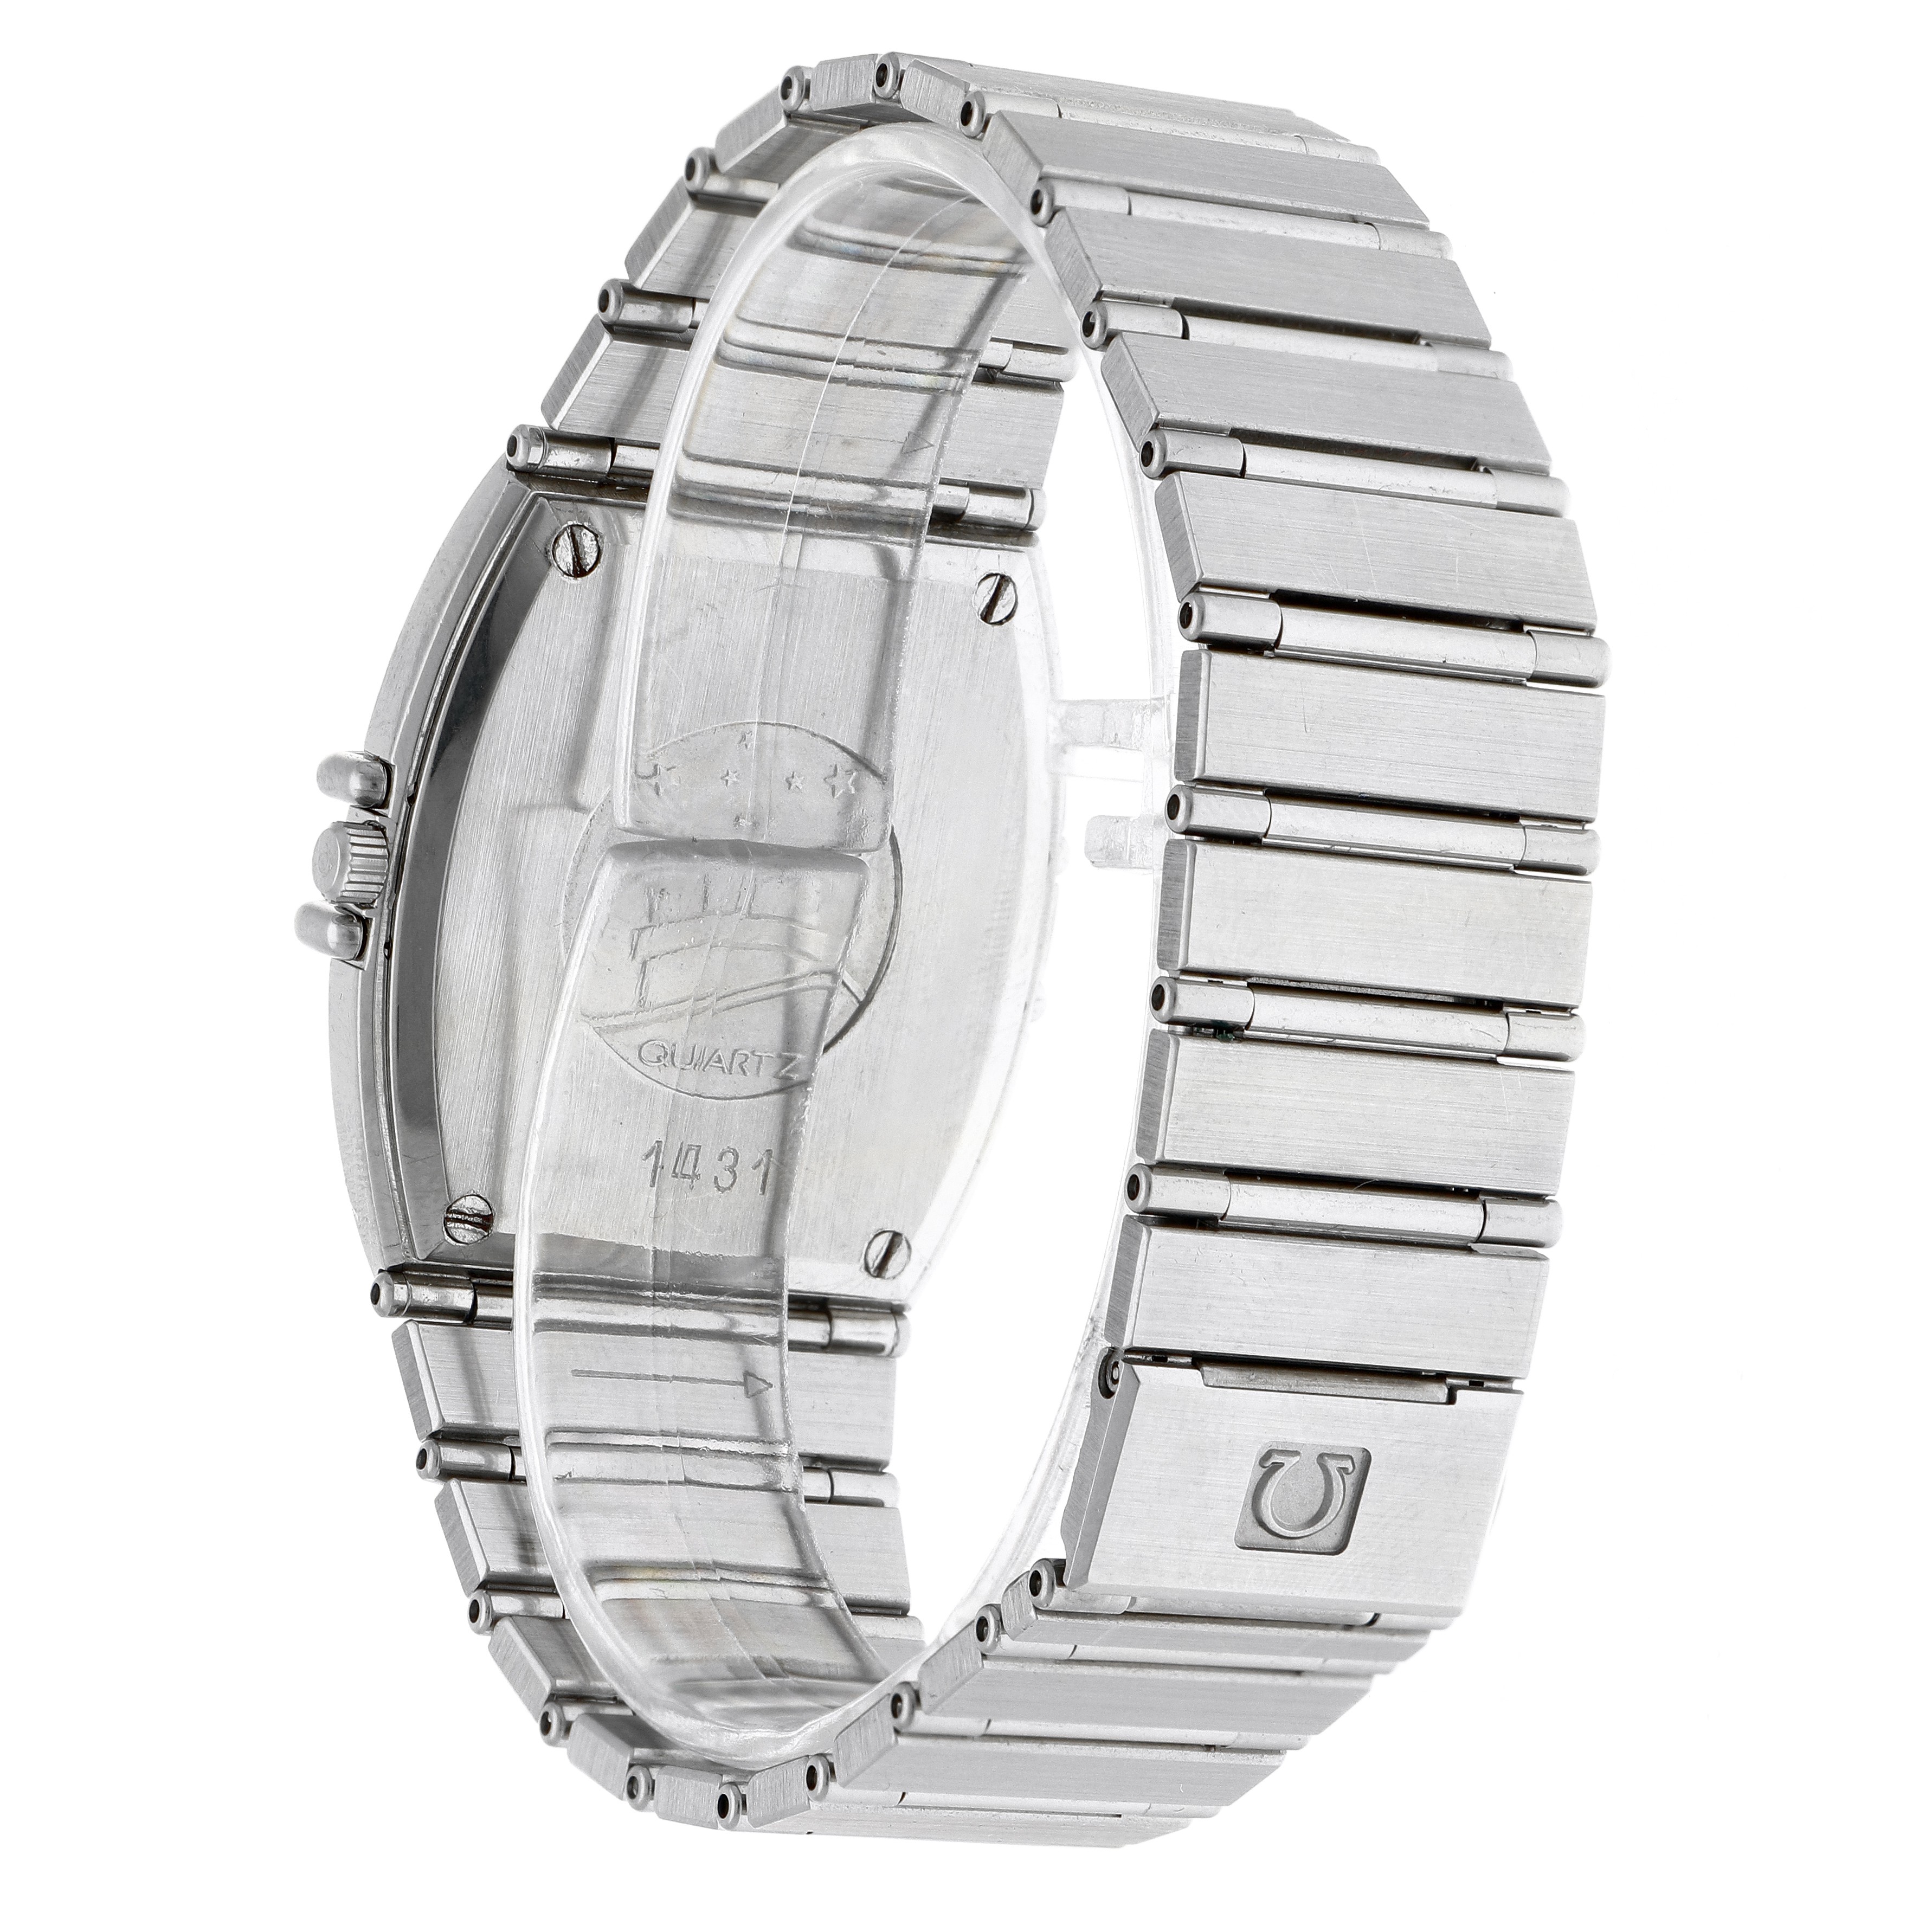 No Reserve - Omega Constellation 3980877 - Men's watch - 1985. - Image 3 of 6